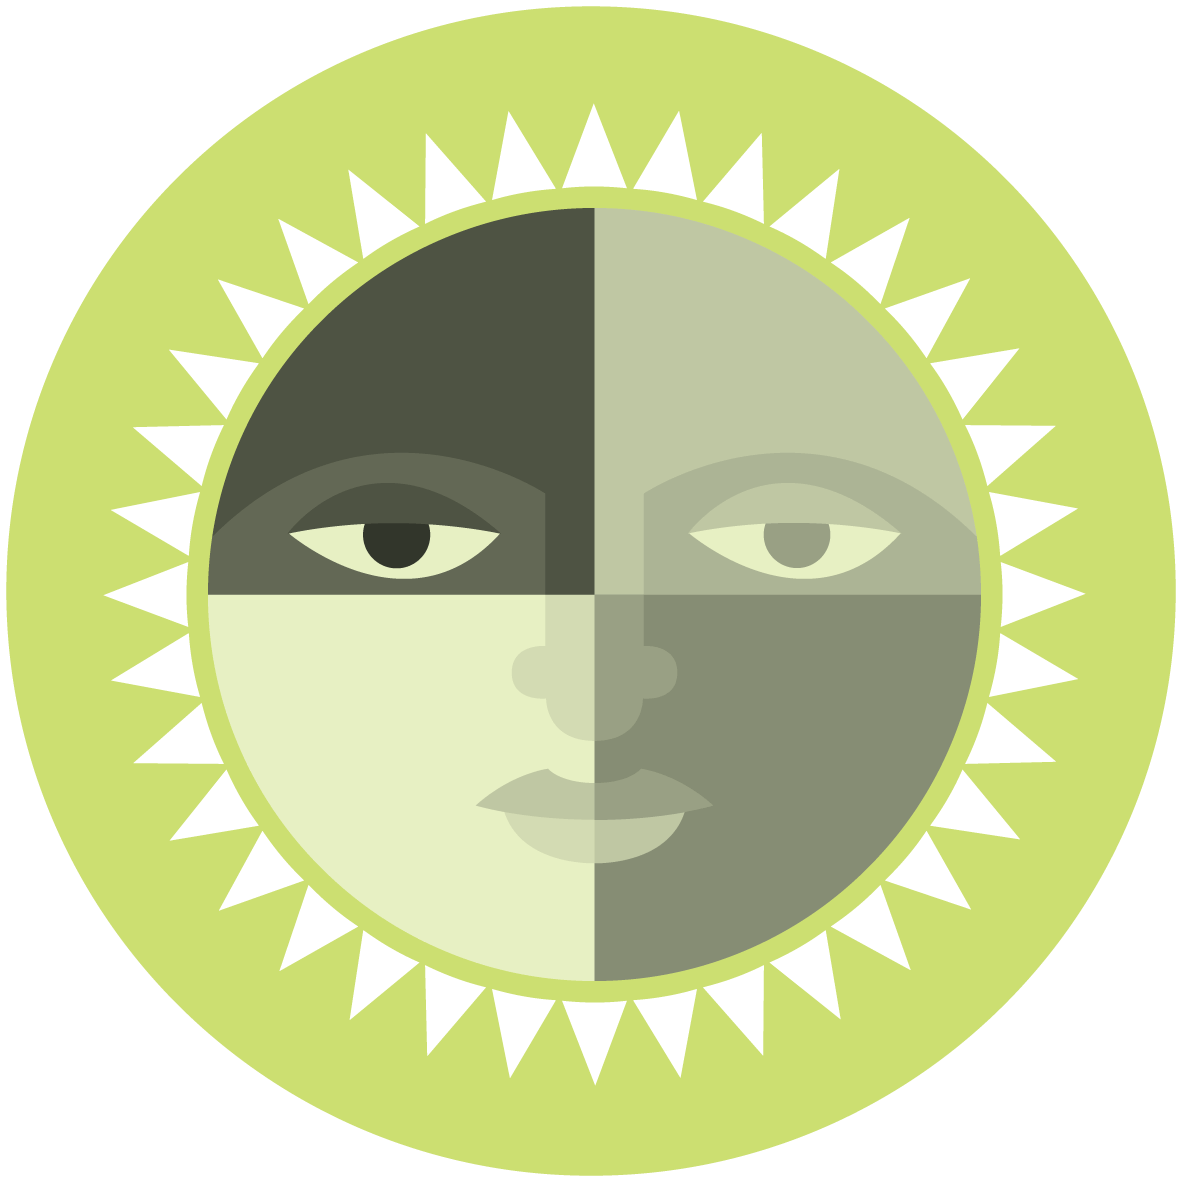 Diversity, Equity, and Inclusion image tile, sun with face on it and green background.